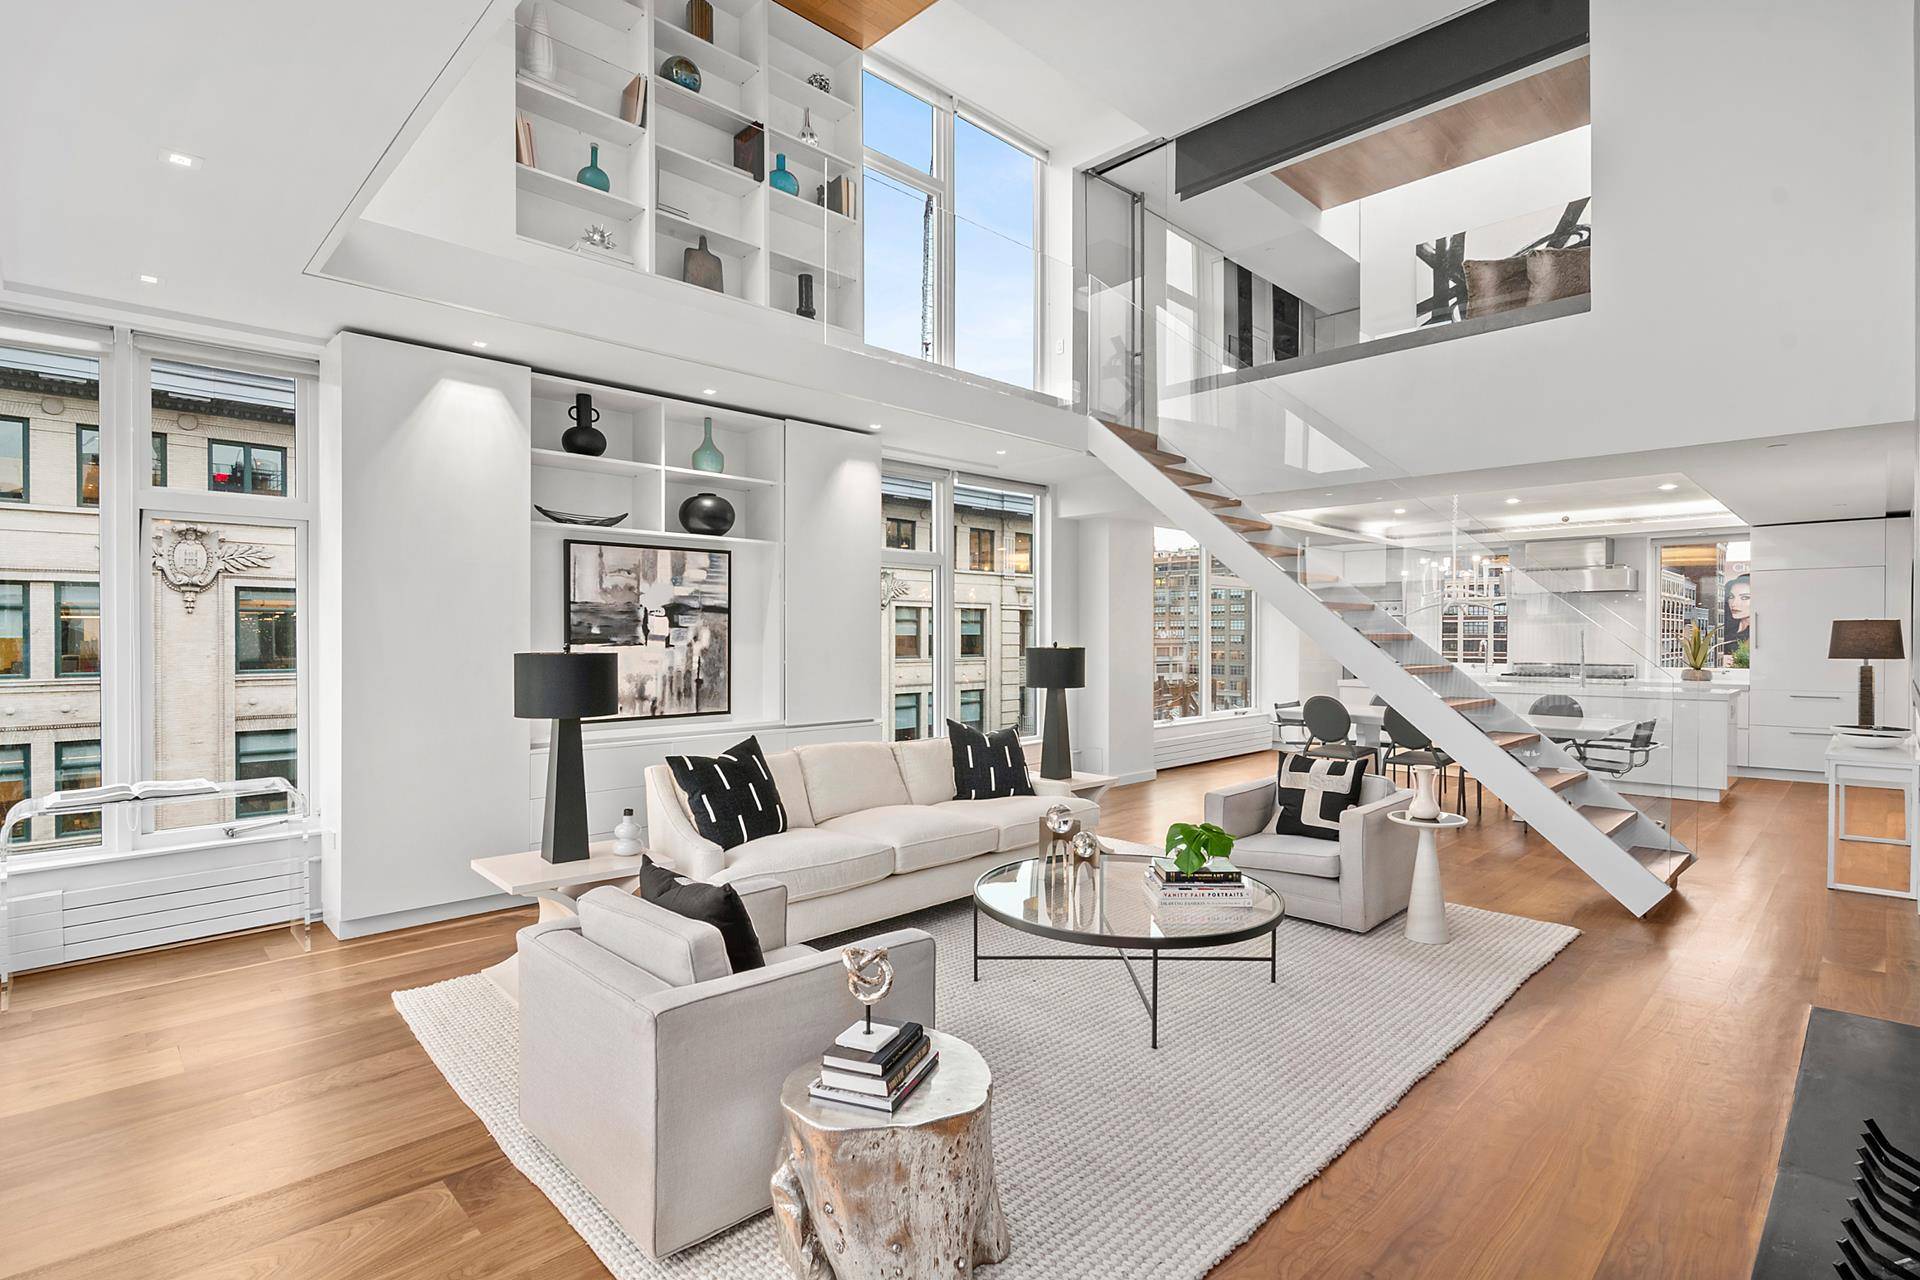 Newly vacant, turnkey opportunity Meticulously crafted by by Staz Zakrzewksi AIA, Z H architects, this extraordinary penthouse atop boutique condominium 304 Spring Street, New York, NY 10013 is newly updated ...